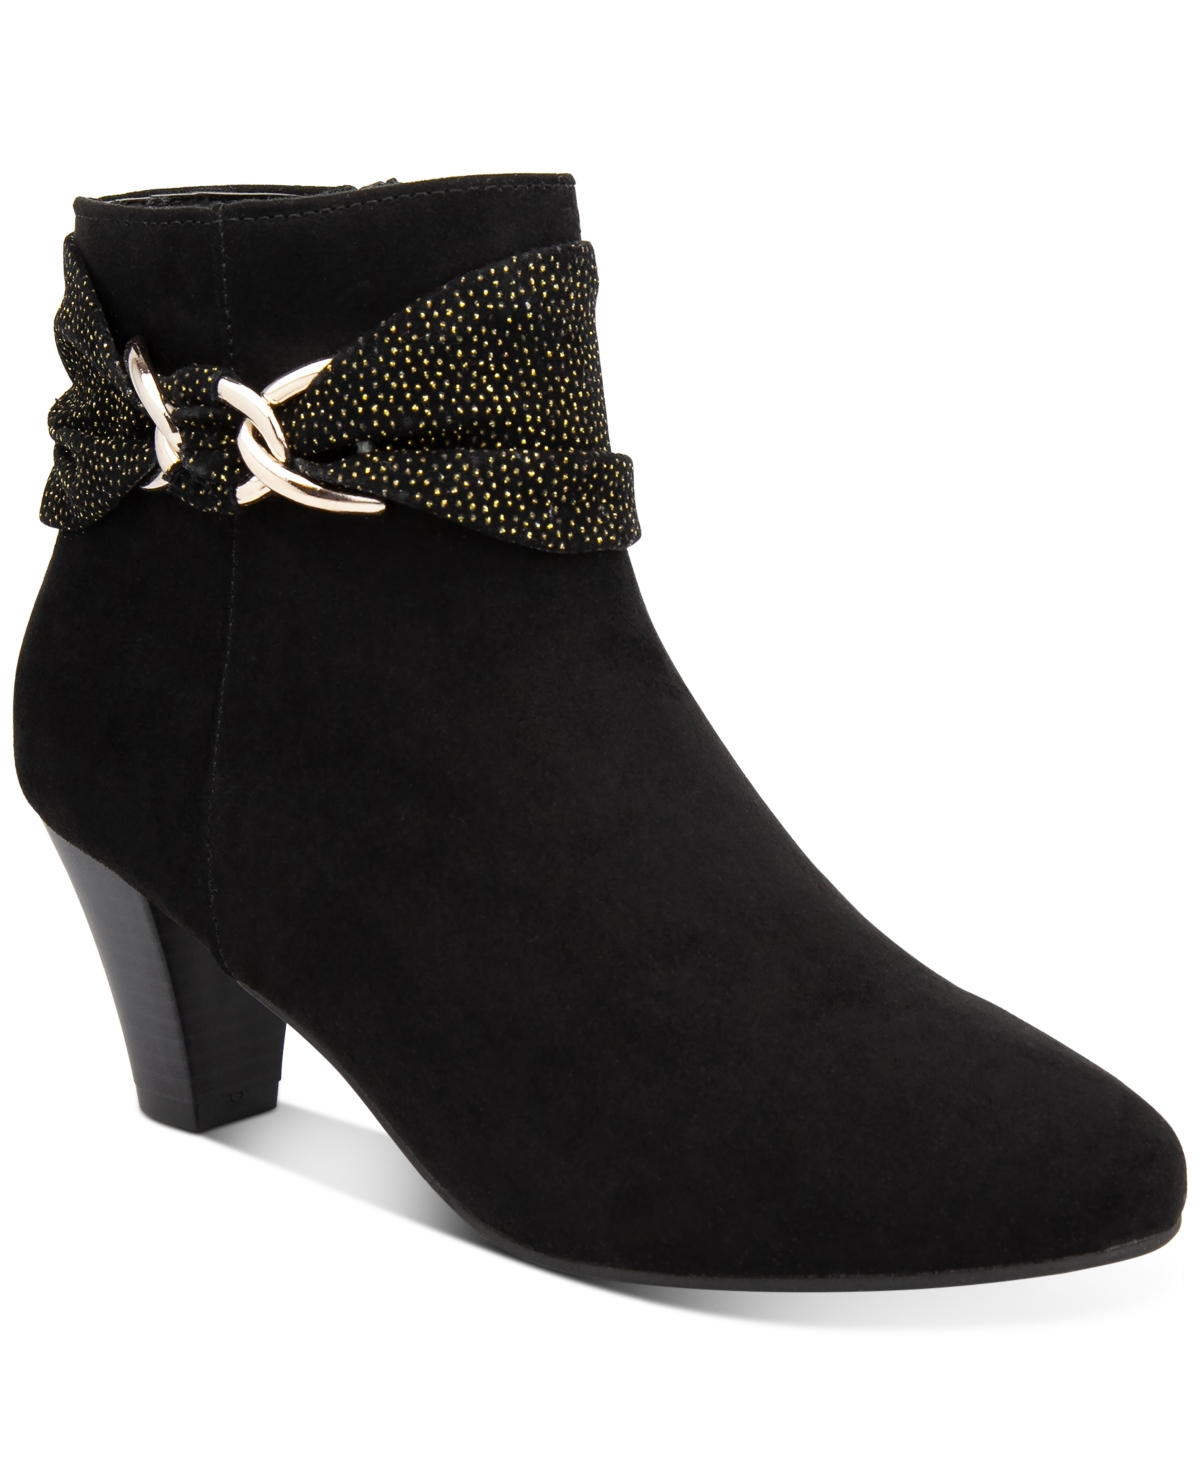 Casee Booties, Created for Macy's - Black